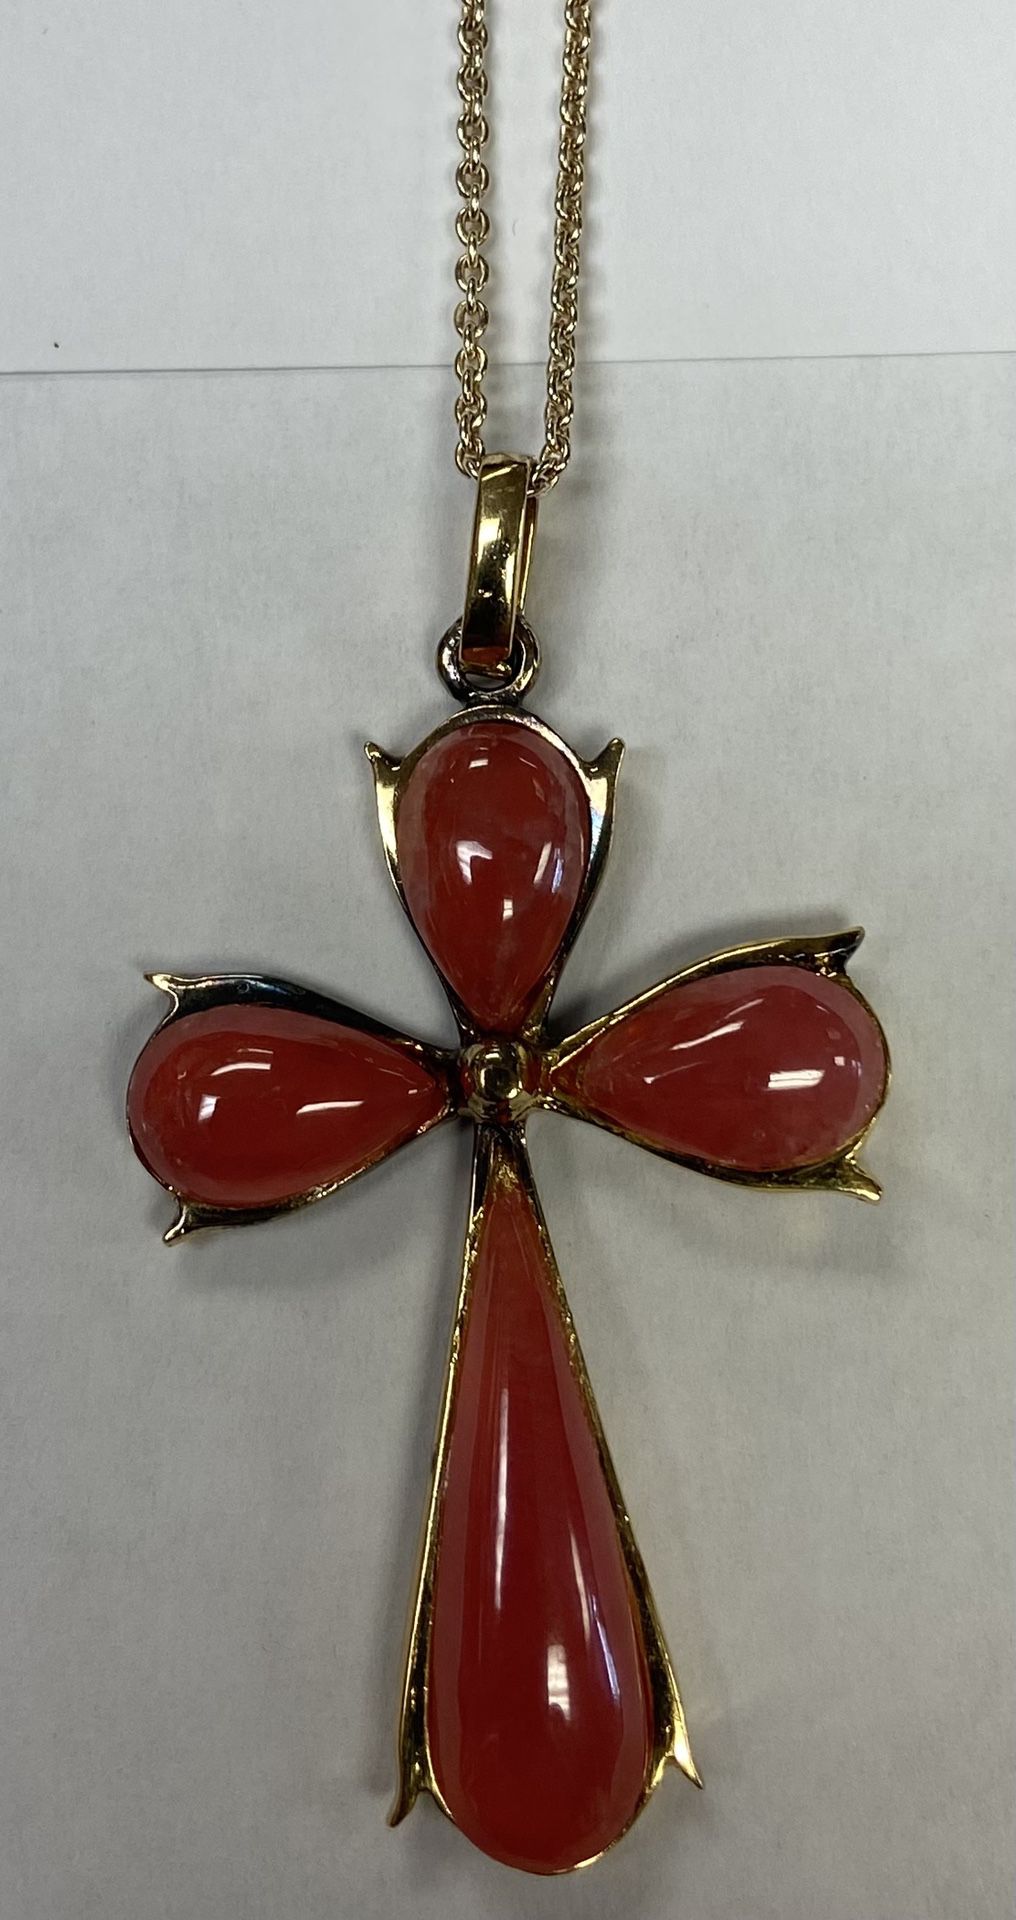 GOLD OVER SILVER .925 BEAUTIFUL VINTAGE CROSS PENDANT WITH QUARTZ STONES ITALY